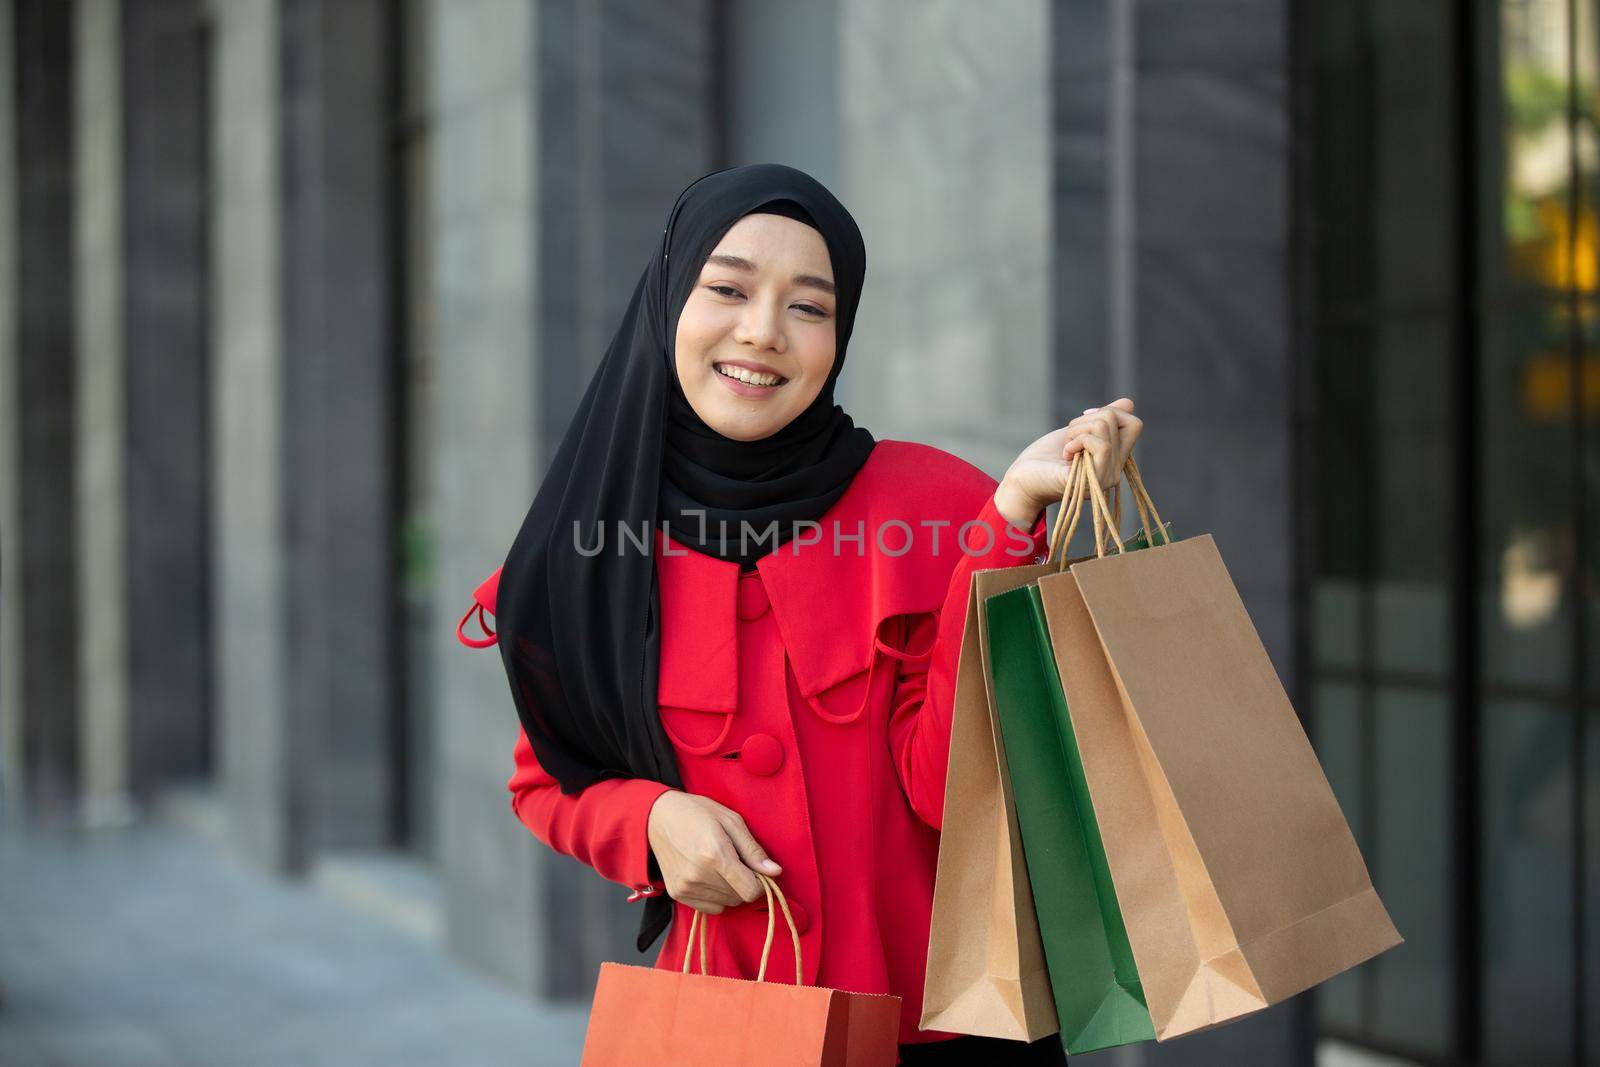 Woman with Shopping Bags